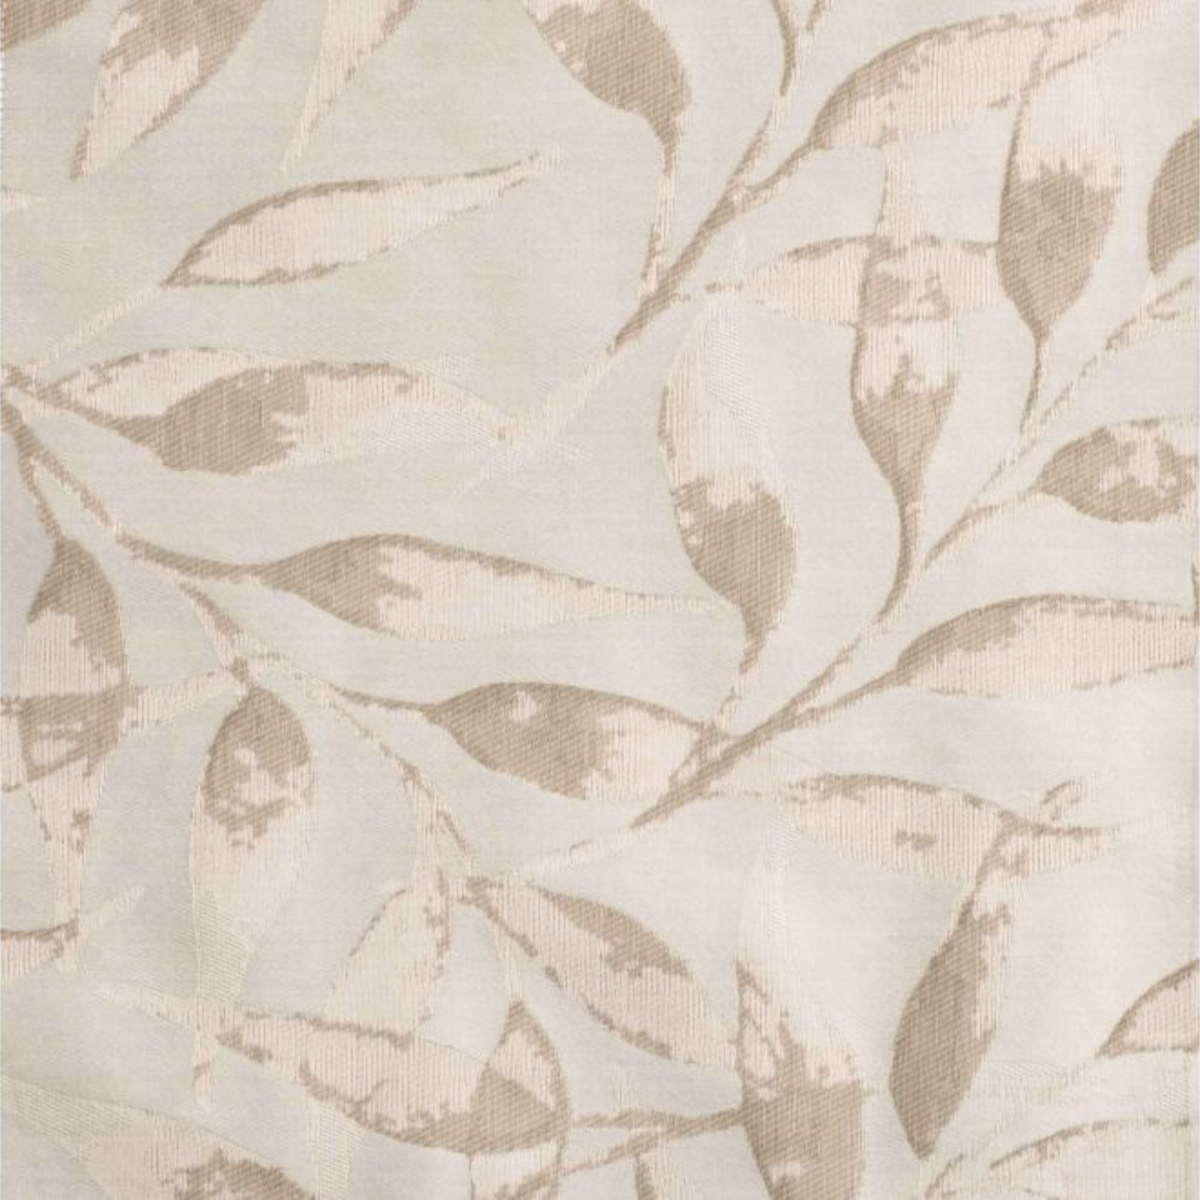 Swatch Sample of Signoria Argentario Bedding in Pink and Khaki Color